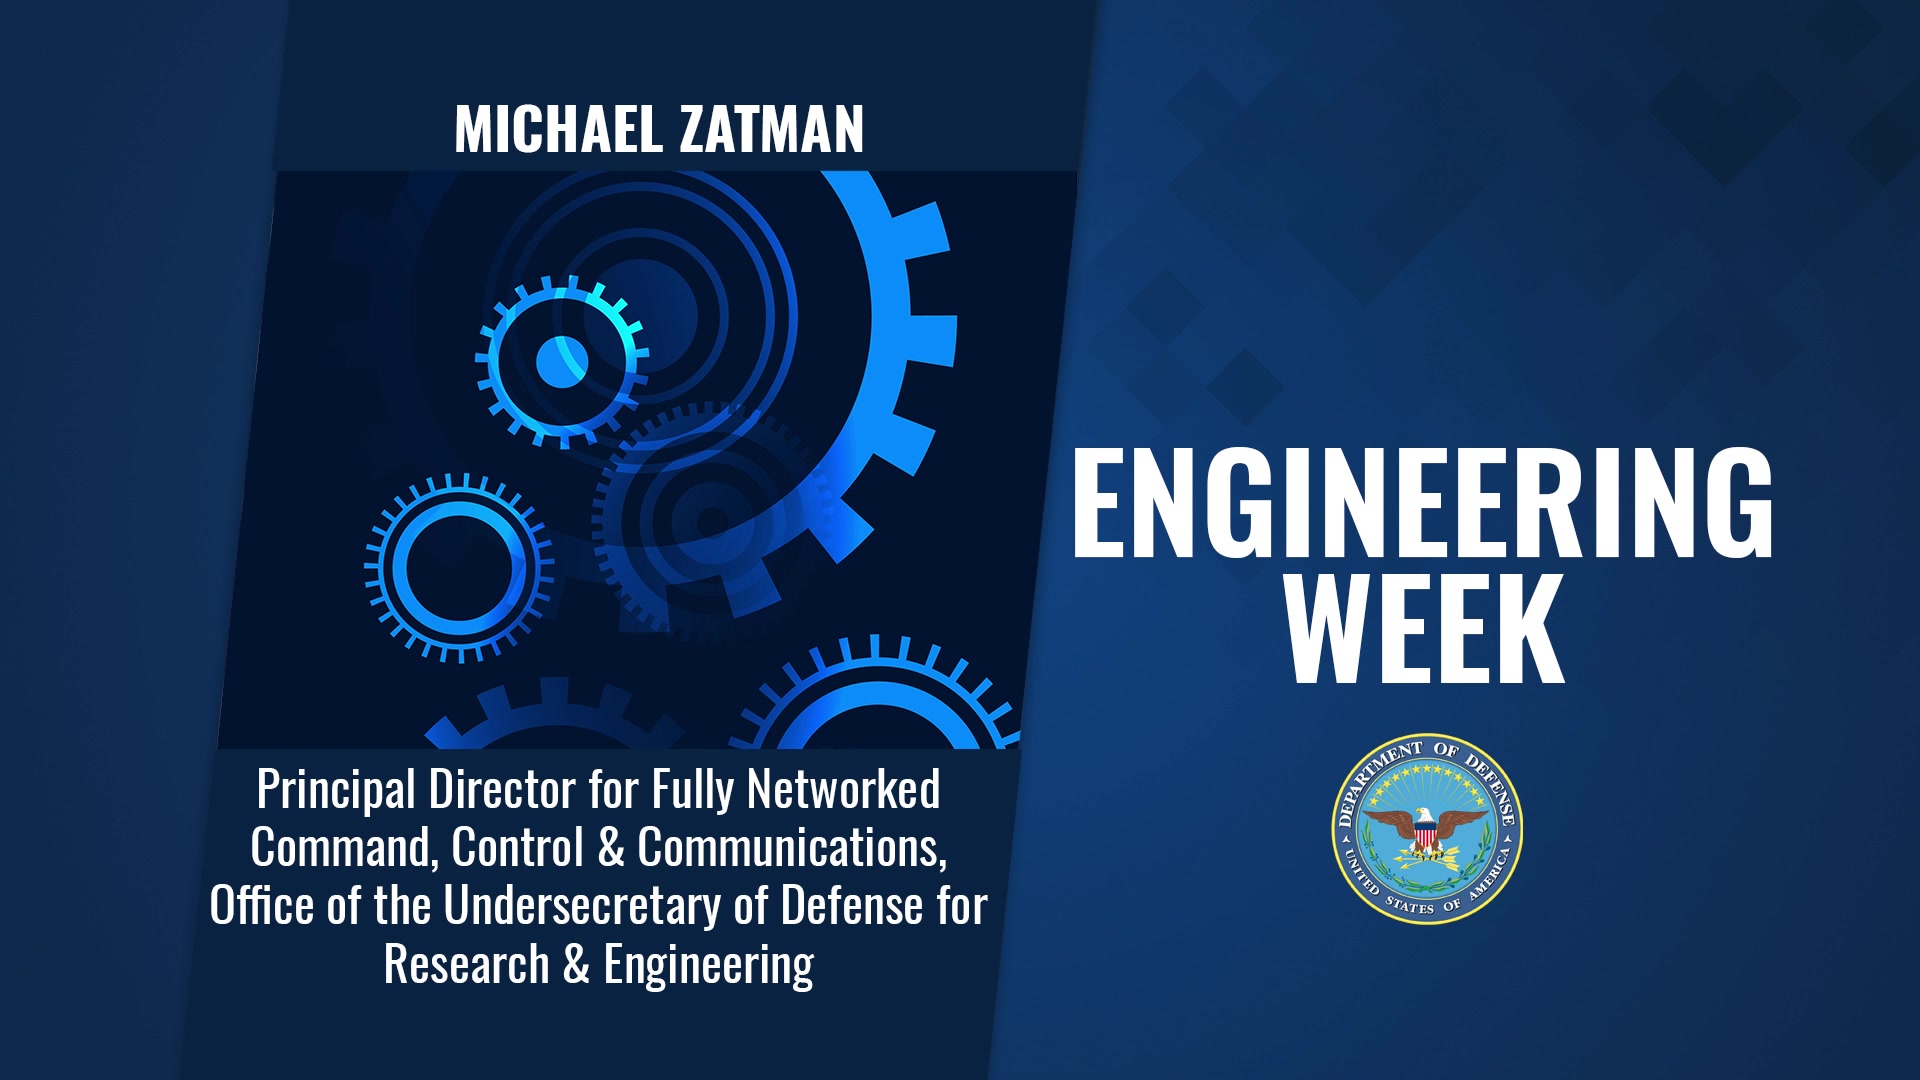 During Engineers Week, Michael Zatman, principal director of fully networked command, control, and communications in the office of the undersecretary of defense for research and engineering, explains why having engineering experience in both the Defense Department and the private sector best supports the nation and what young people must do to be engineers in the DOD. The event runs Feb. 21-27.